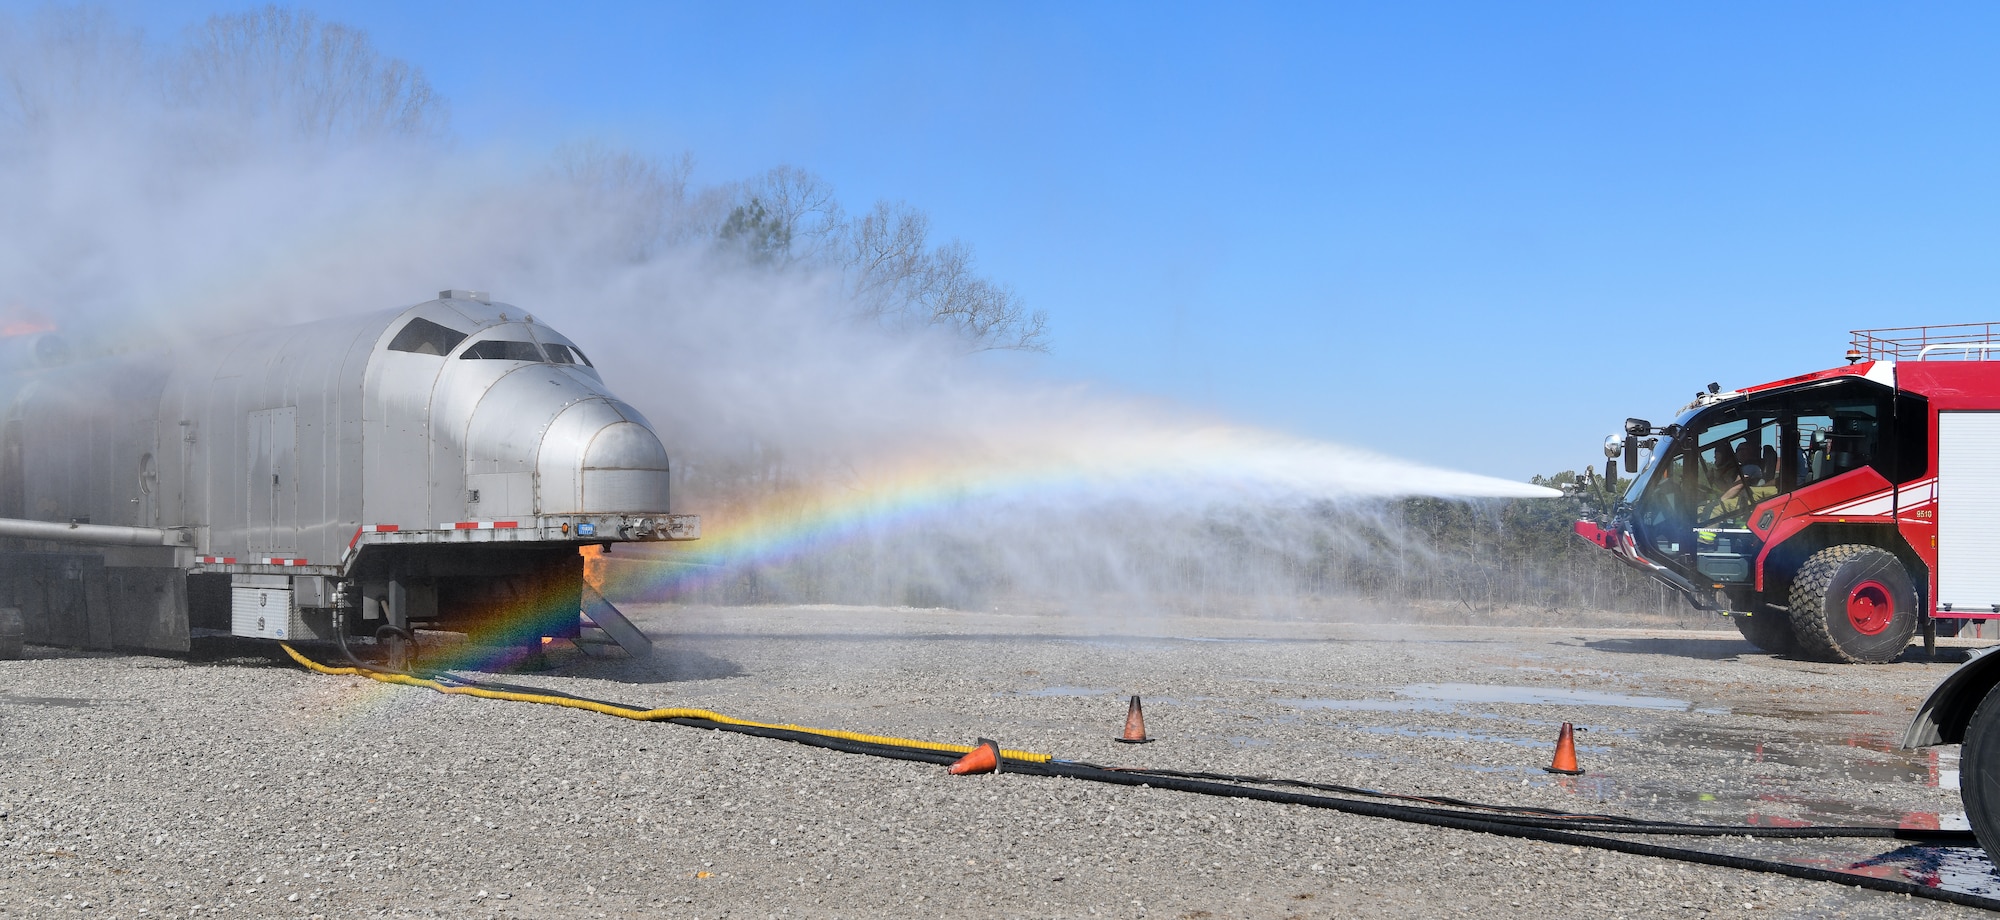 Spray from firefighting vehicle bumper turret creating a rainbow